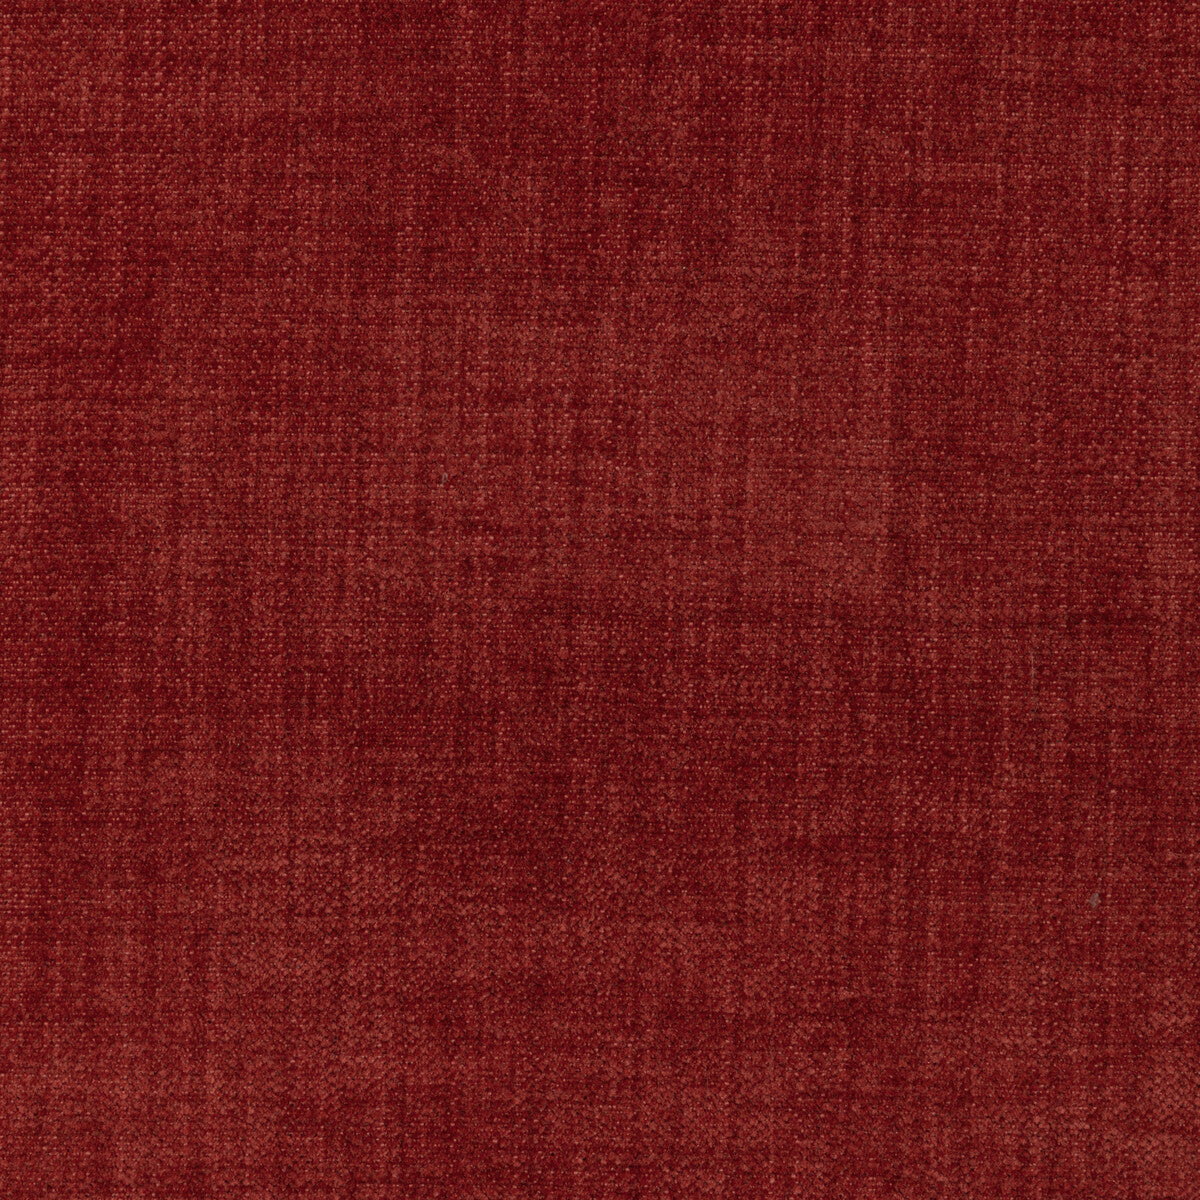 Accommodate fabric in cranberry color - pattern 36255.9.0 - by Kravet Contract in the Supreen collection